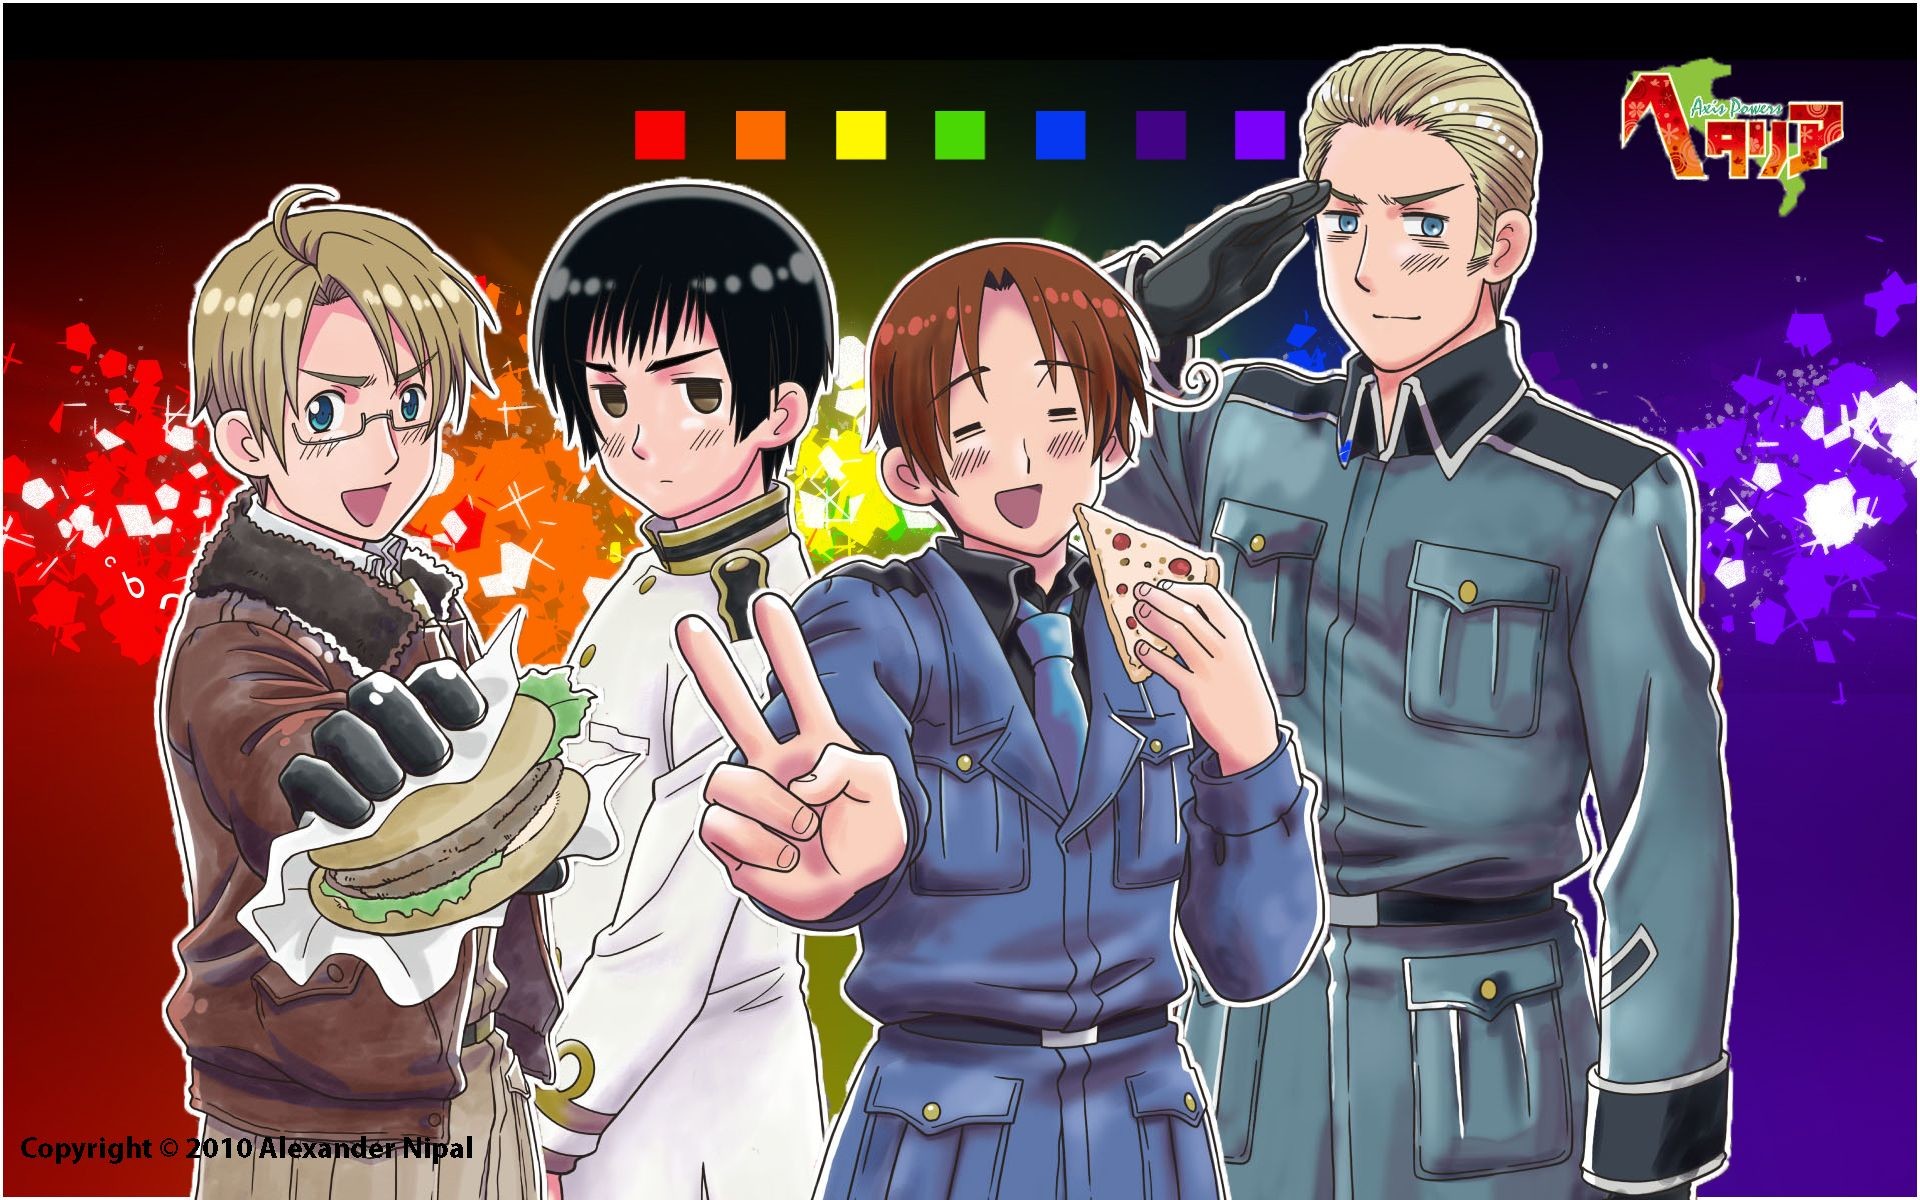 1920x1200 HD Wallpaper and background photos of Hetalia Wallpaper for fans of  blazeandarose images.